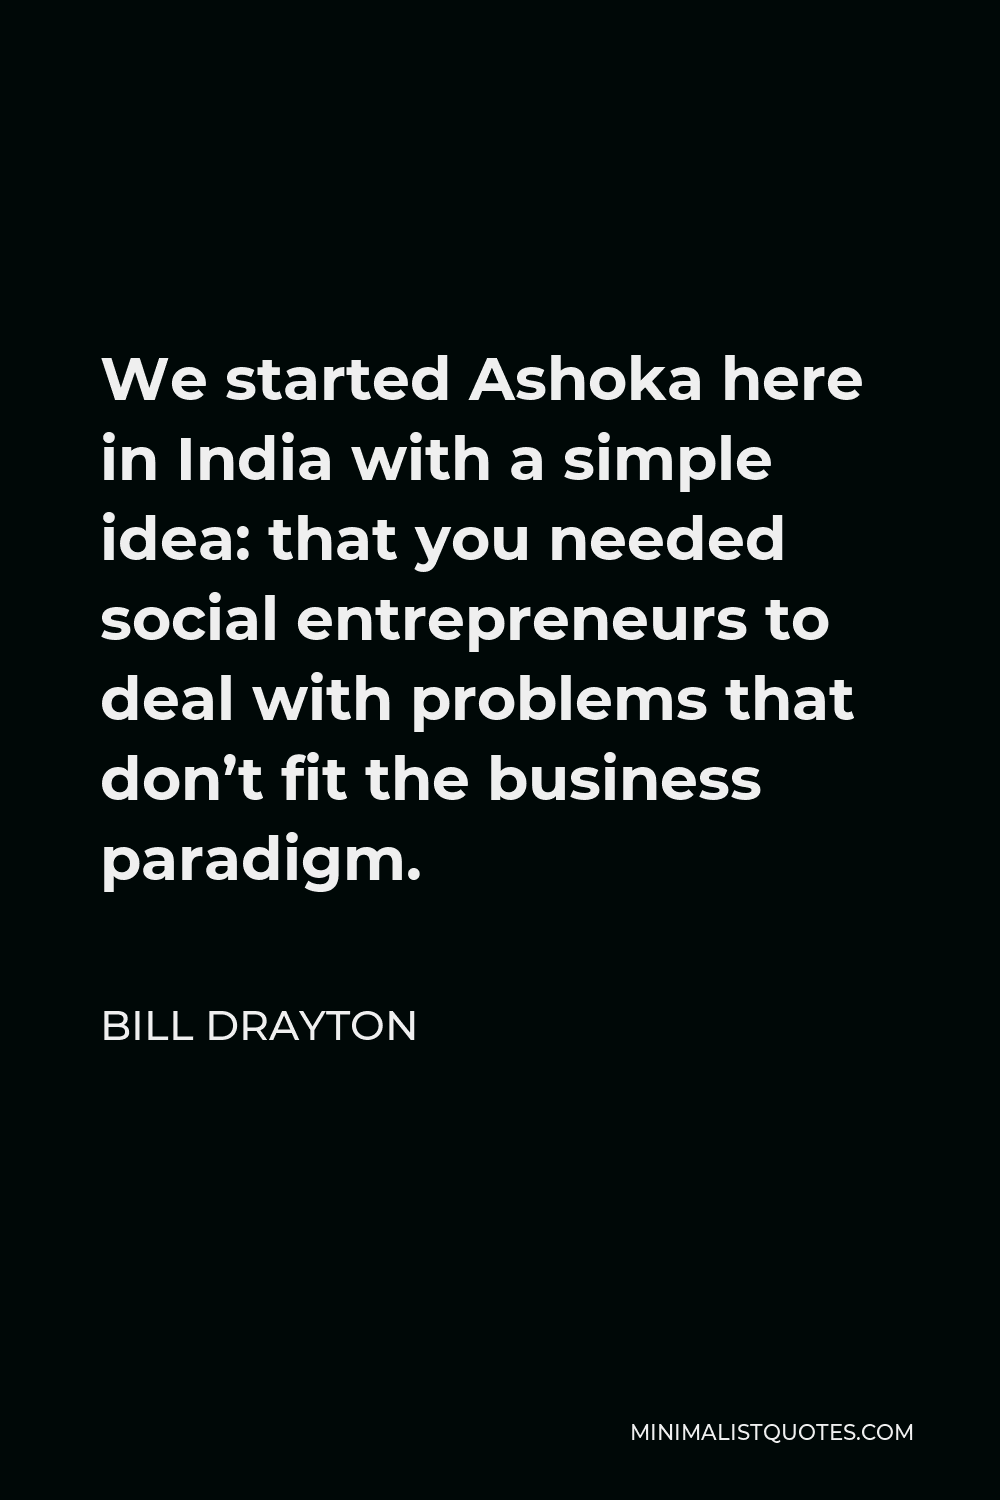 Bill Drayton Quote - We started Ashoka here in India with a simple idea: that you needed social entrepreneurs to deal with problems that don’t fit the business paradigm.